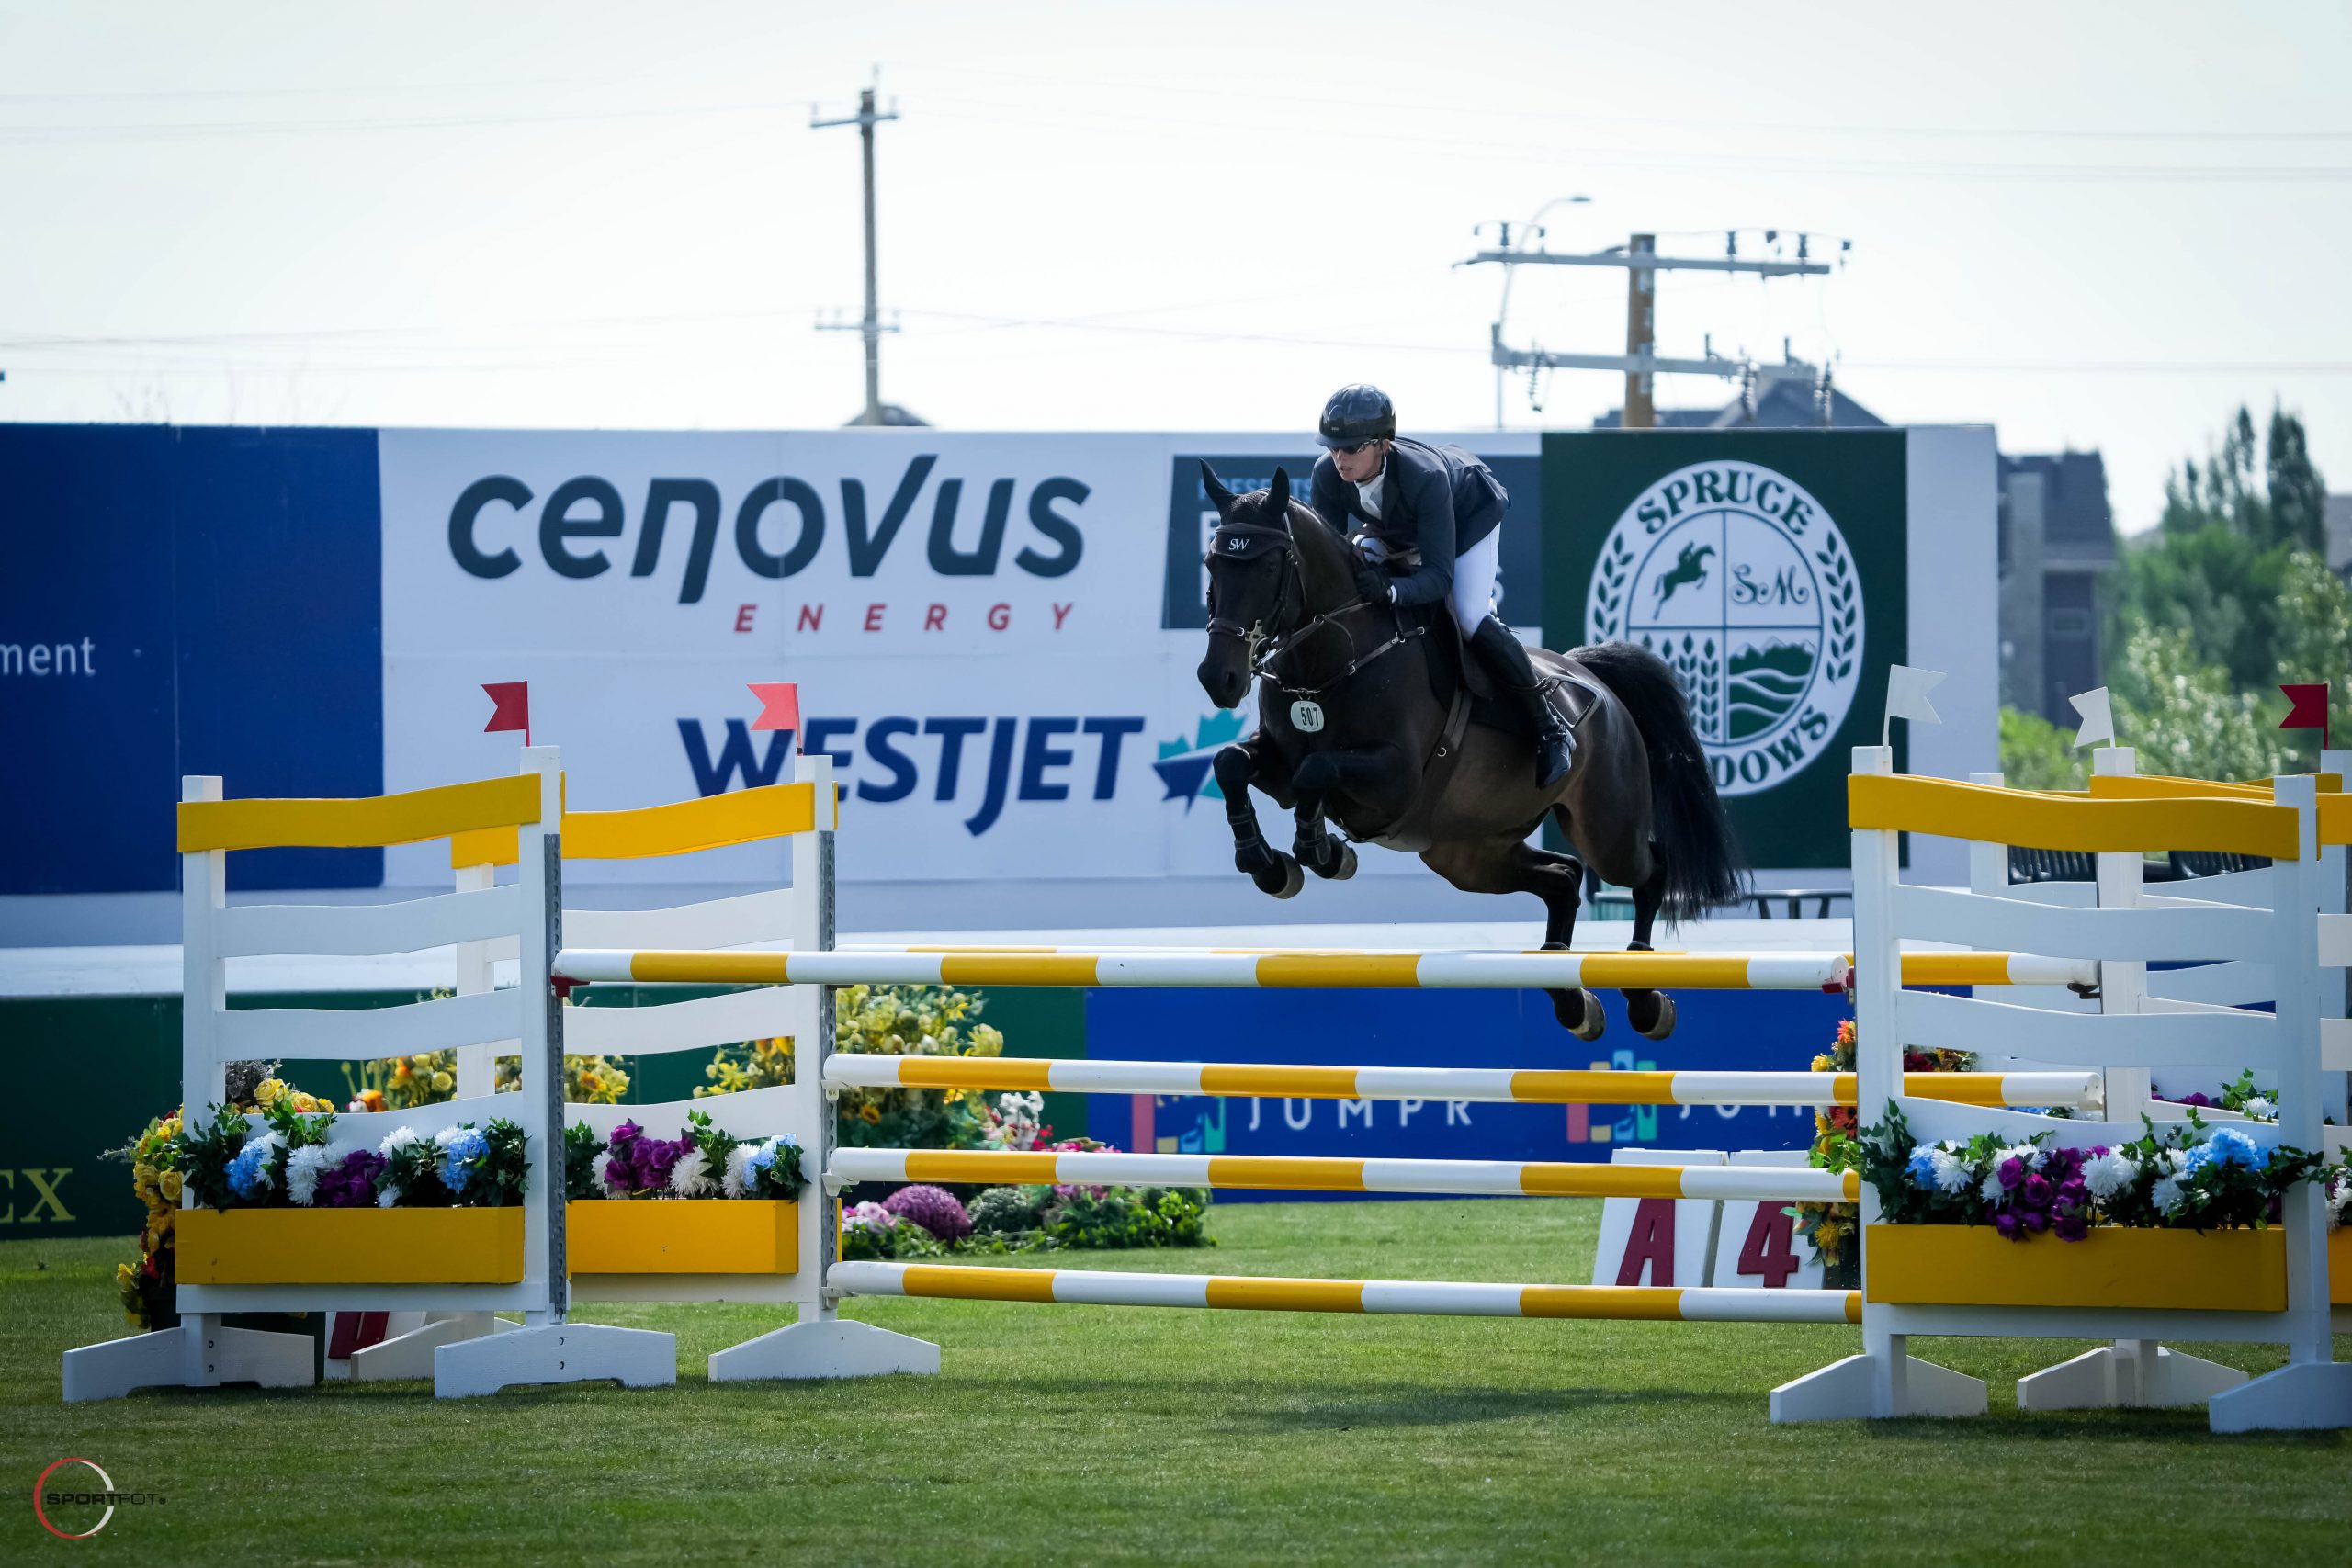 Starkato with another great perfomance for a top 11 place finish at Spruce Meadows!